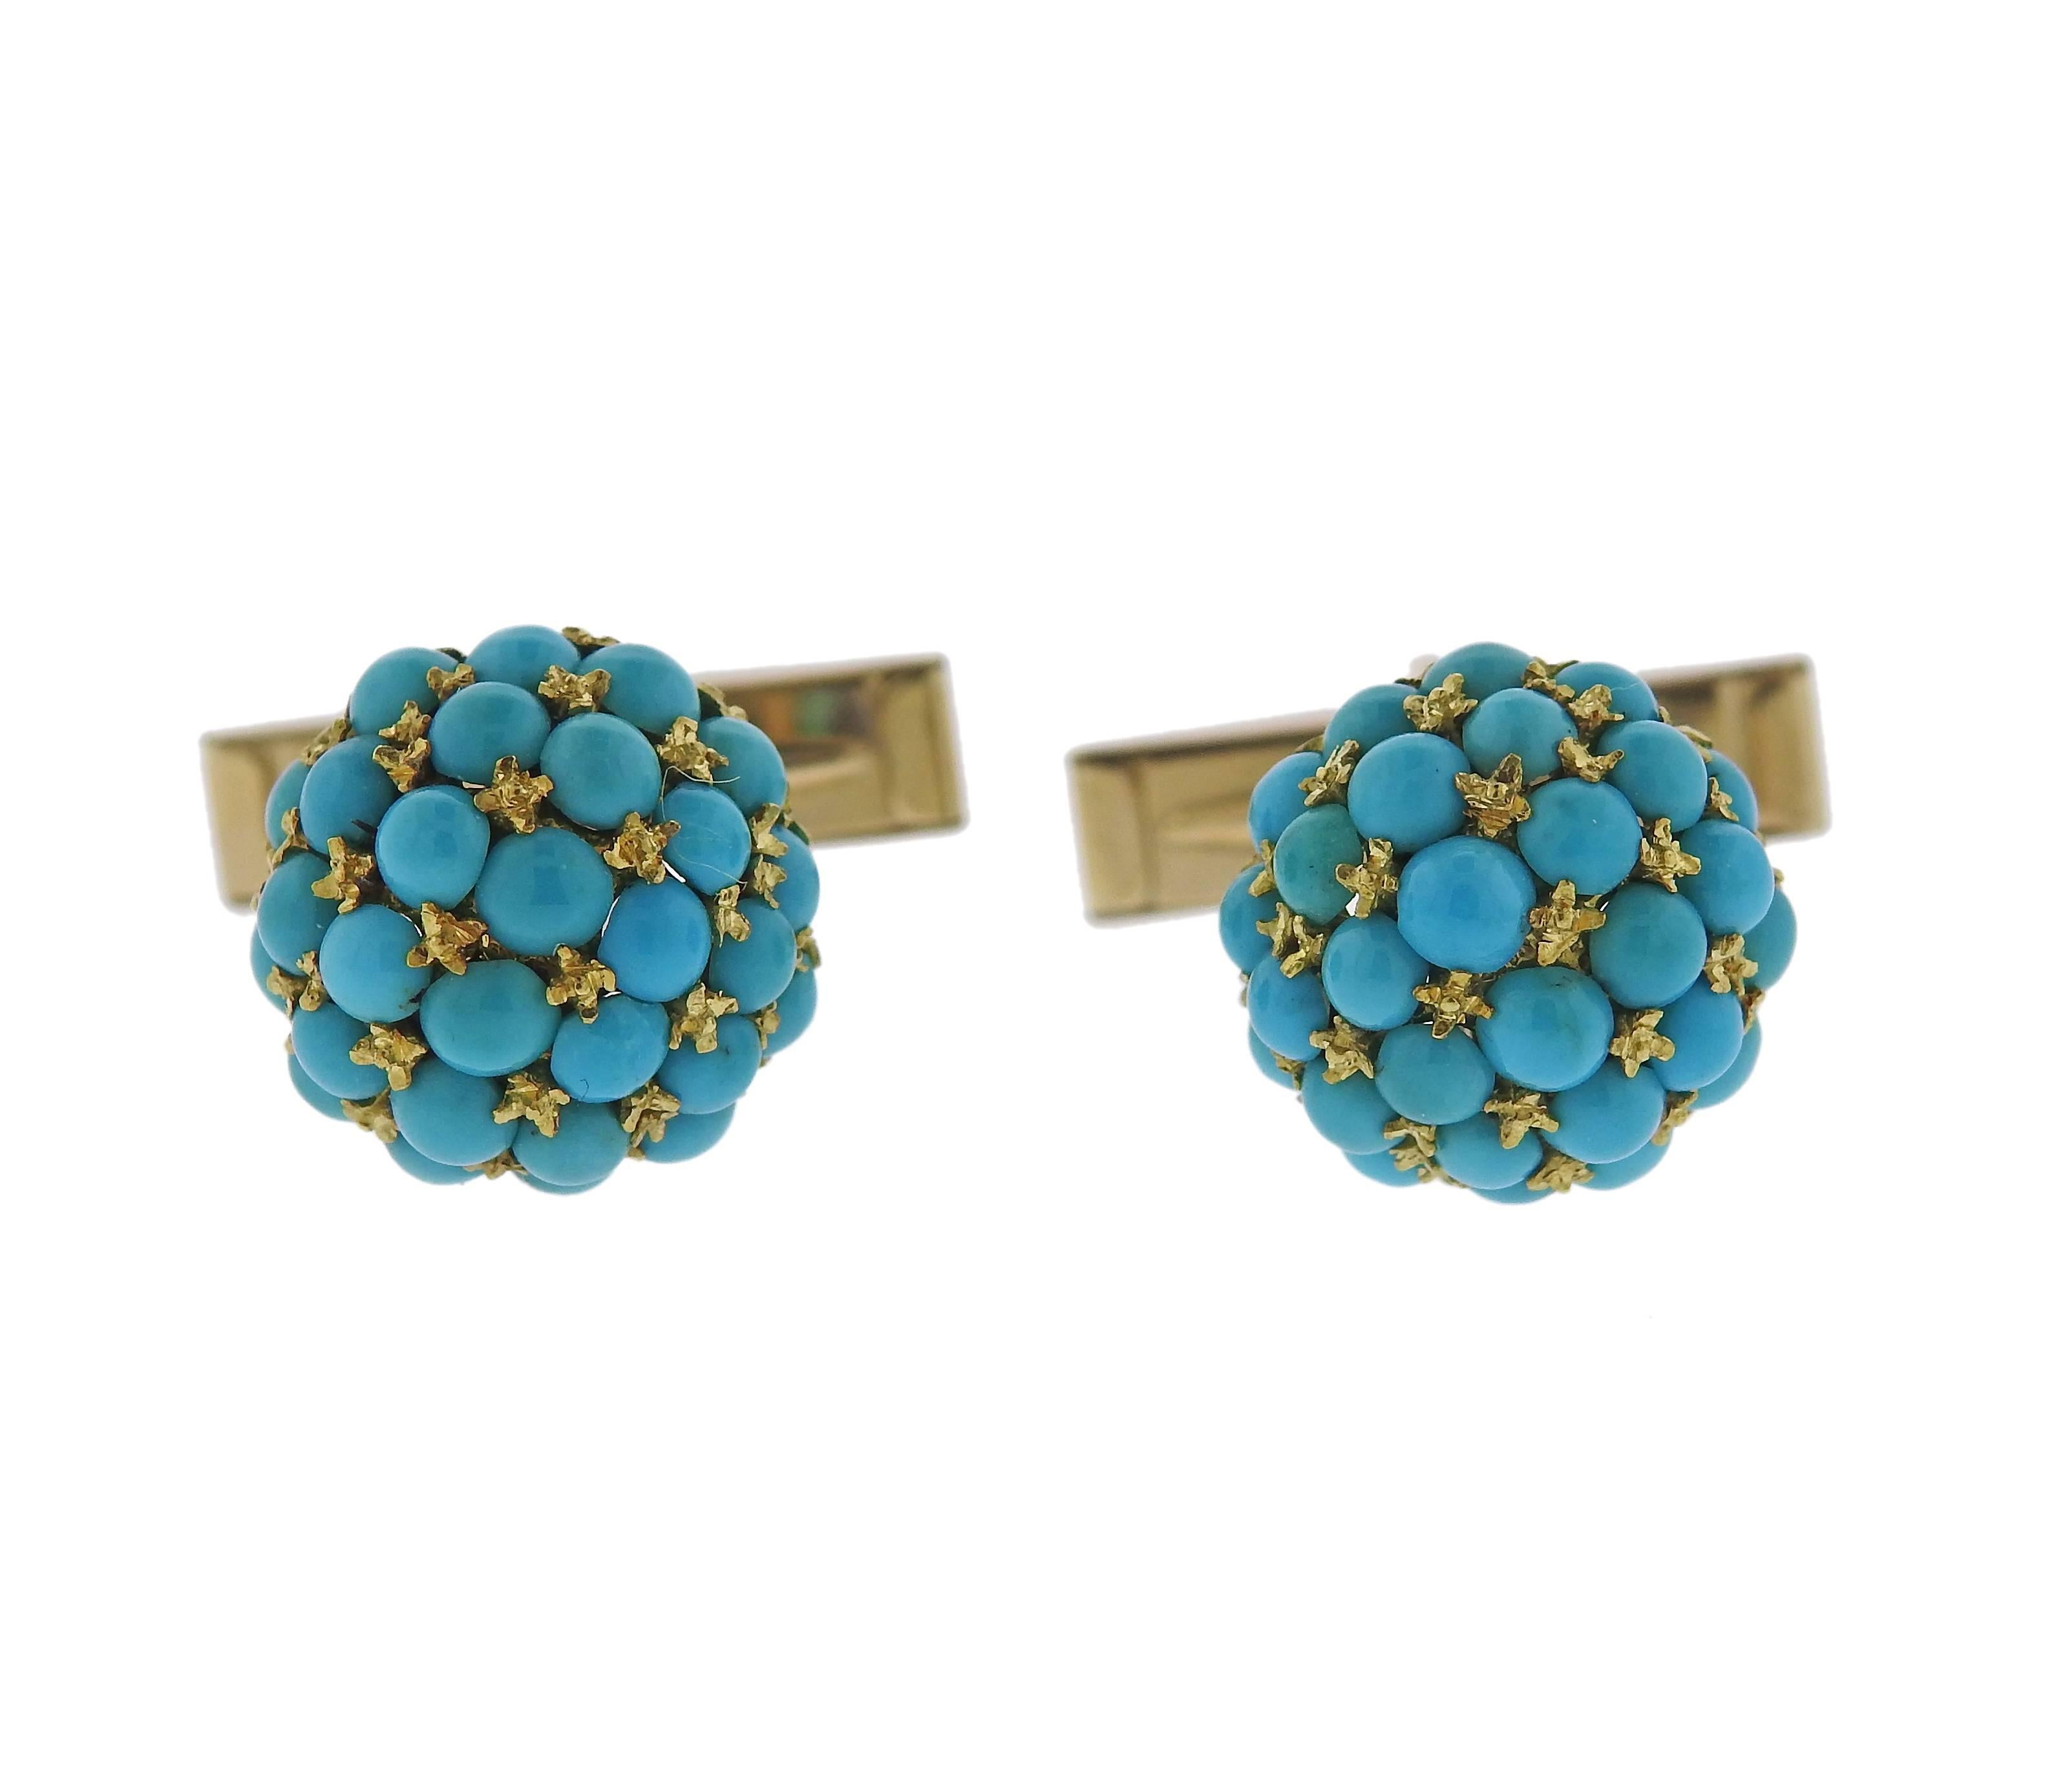 Pair of vintage circa 1960s cufflinks, set in 18k gold, decorated with turquoise beads. Cufflink top is 14mm in diameter . Top tested 18k, hardware marked 14k. Weight - 11.7 grams 